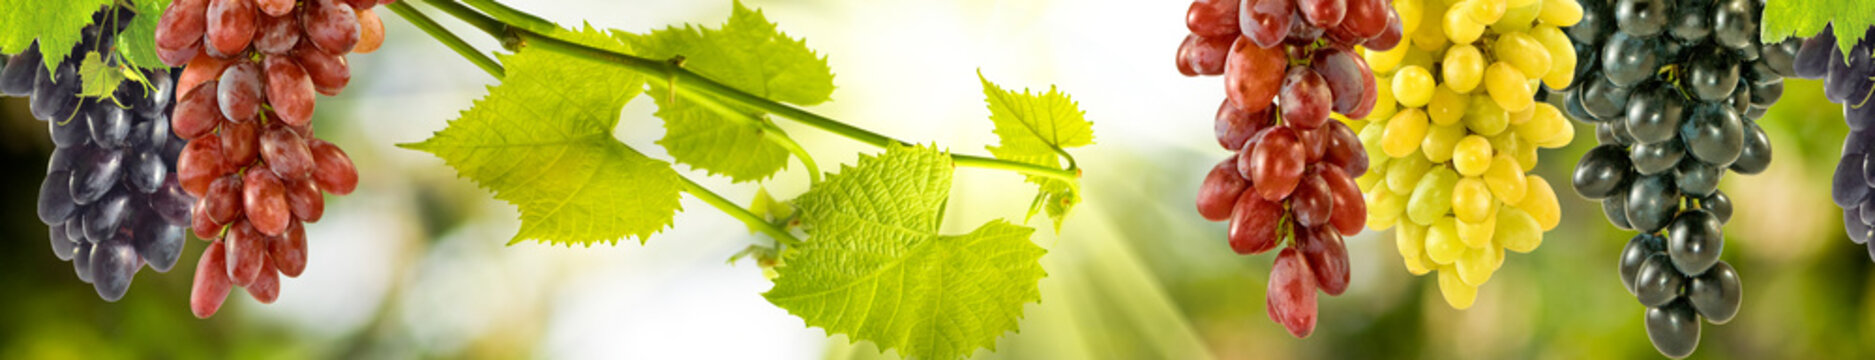 ripe grapes hanging in bunches on a green blurred background. Horizontal banner